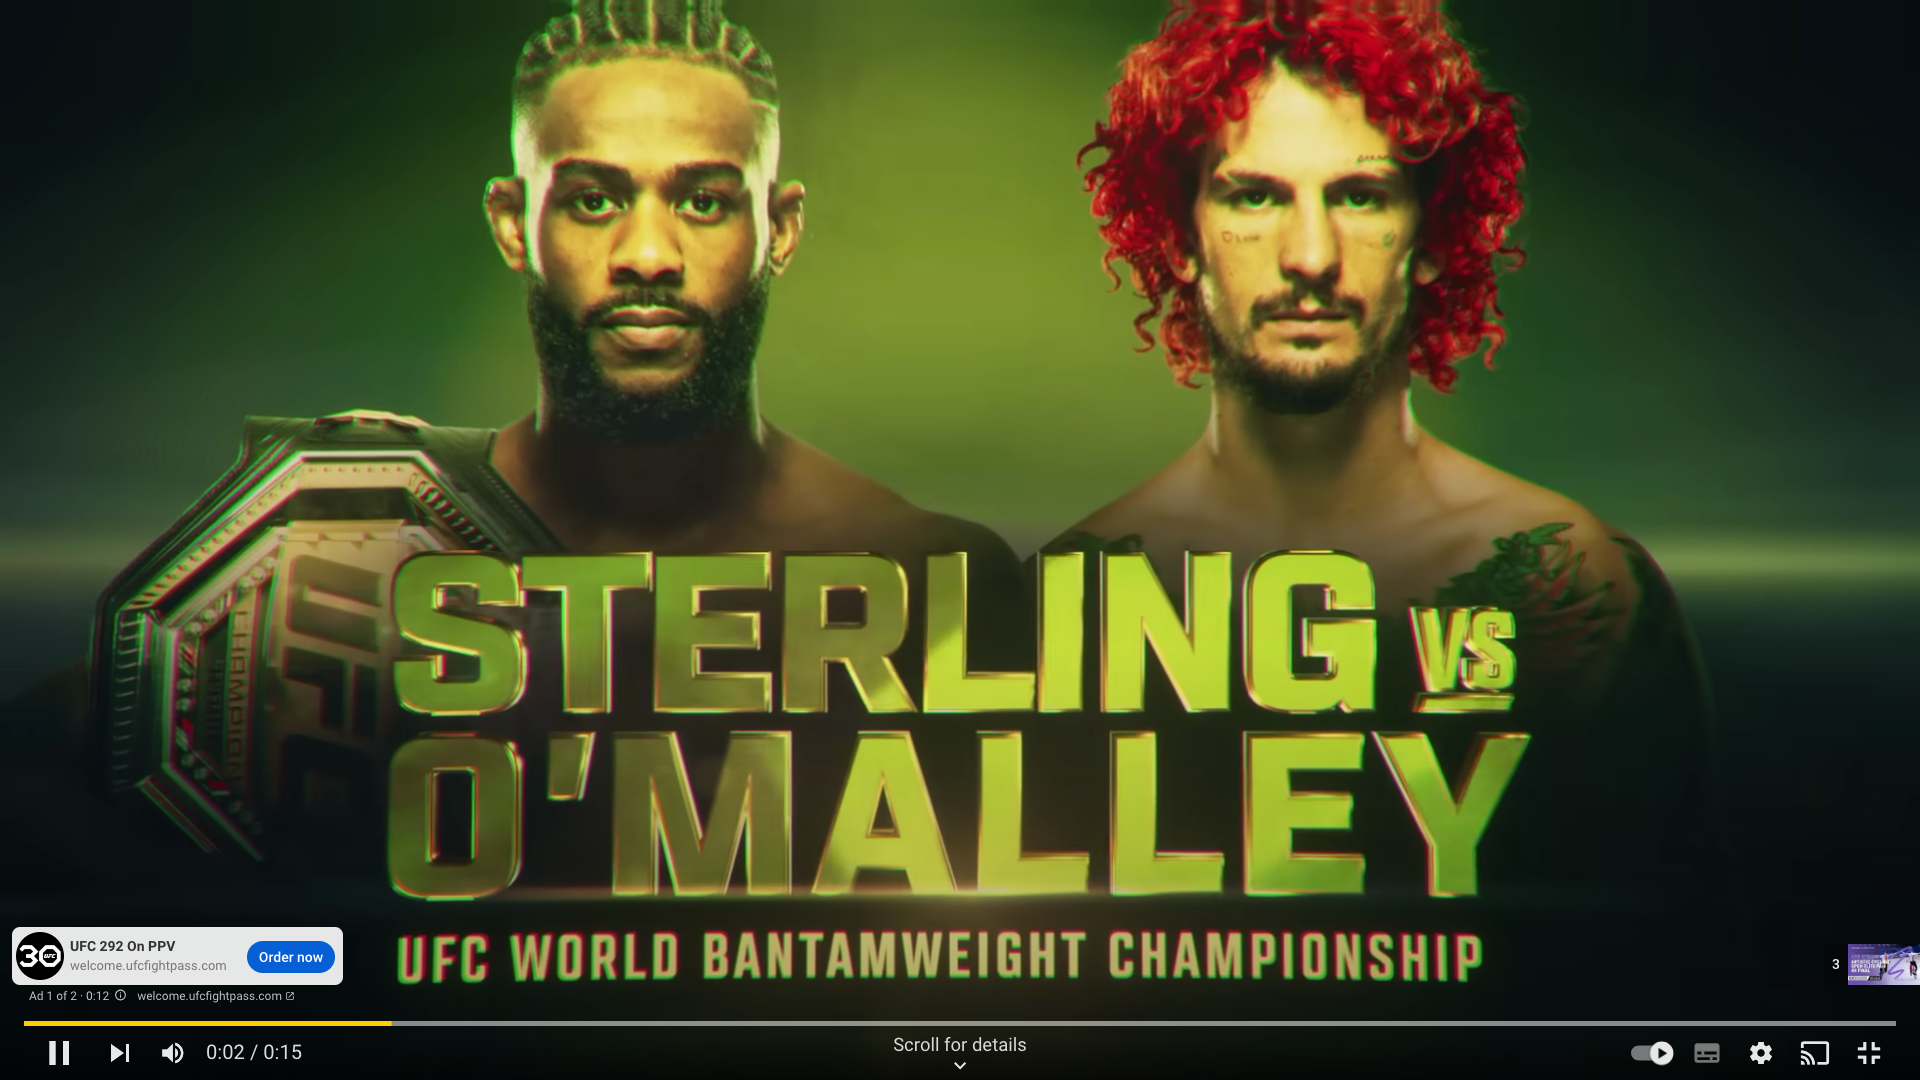 Screenshot of Youtube ad announcing a UFC championship between Sterling vs O'Malley.